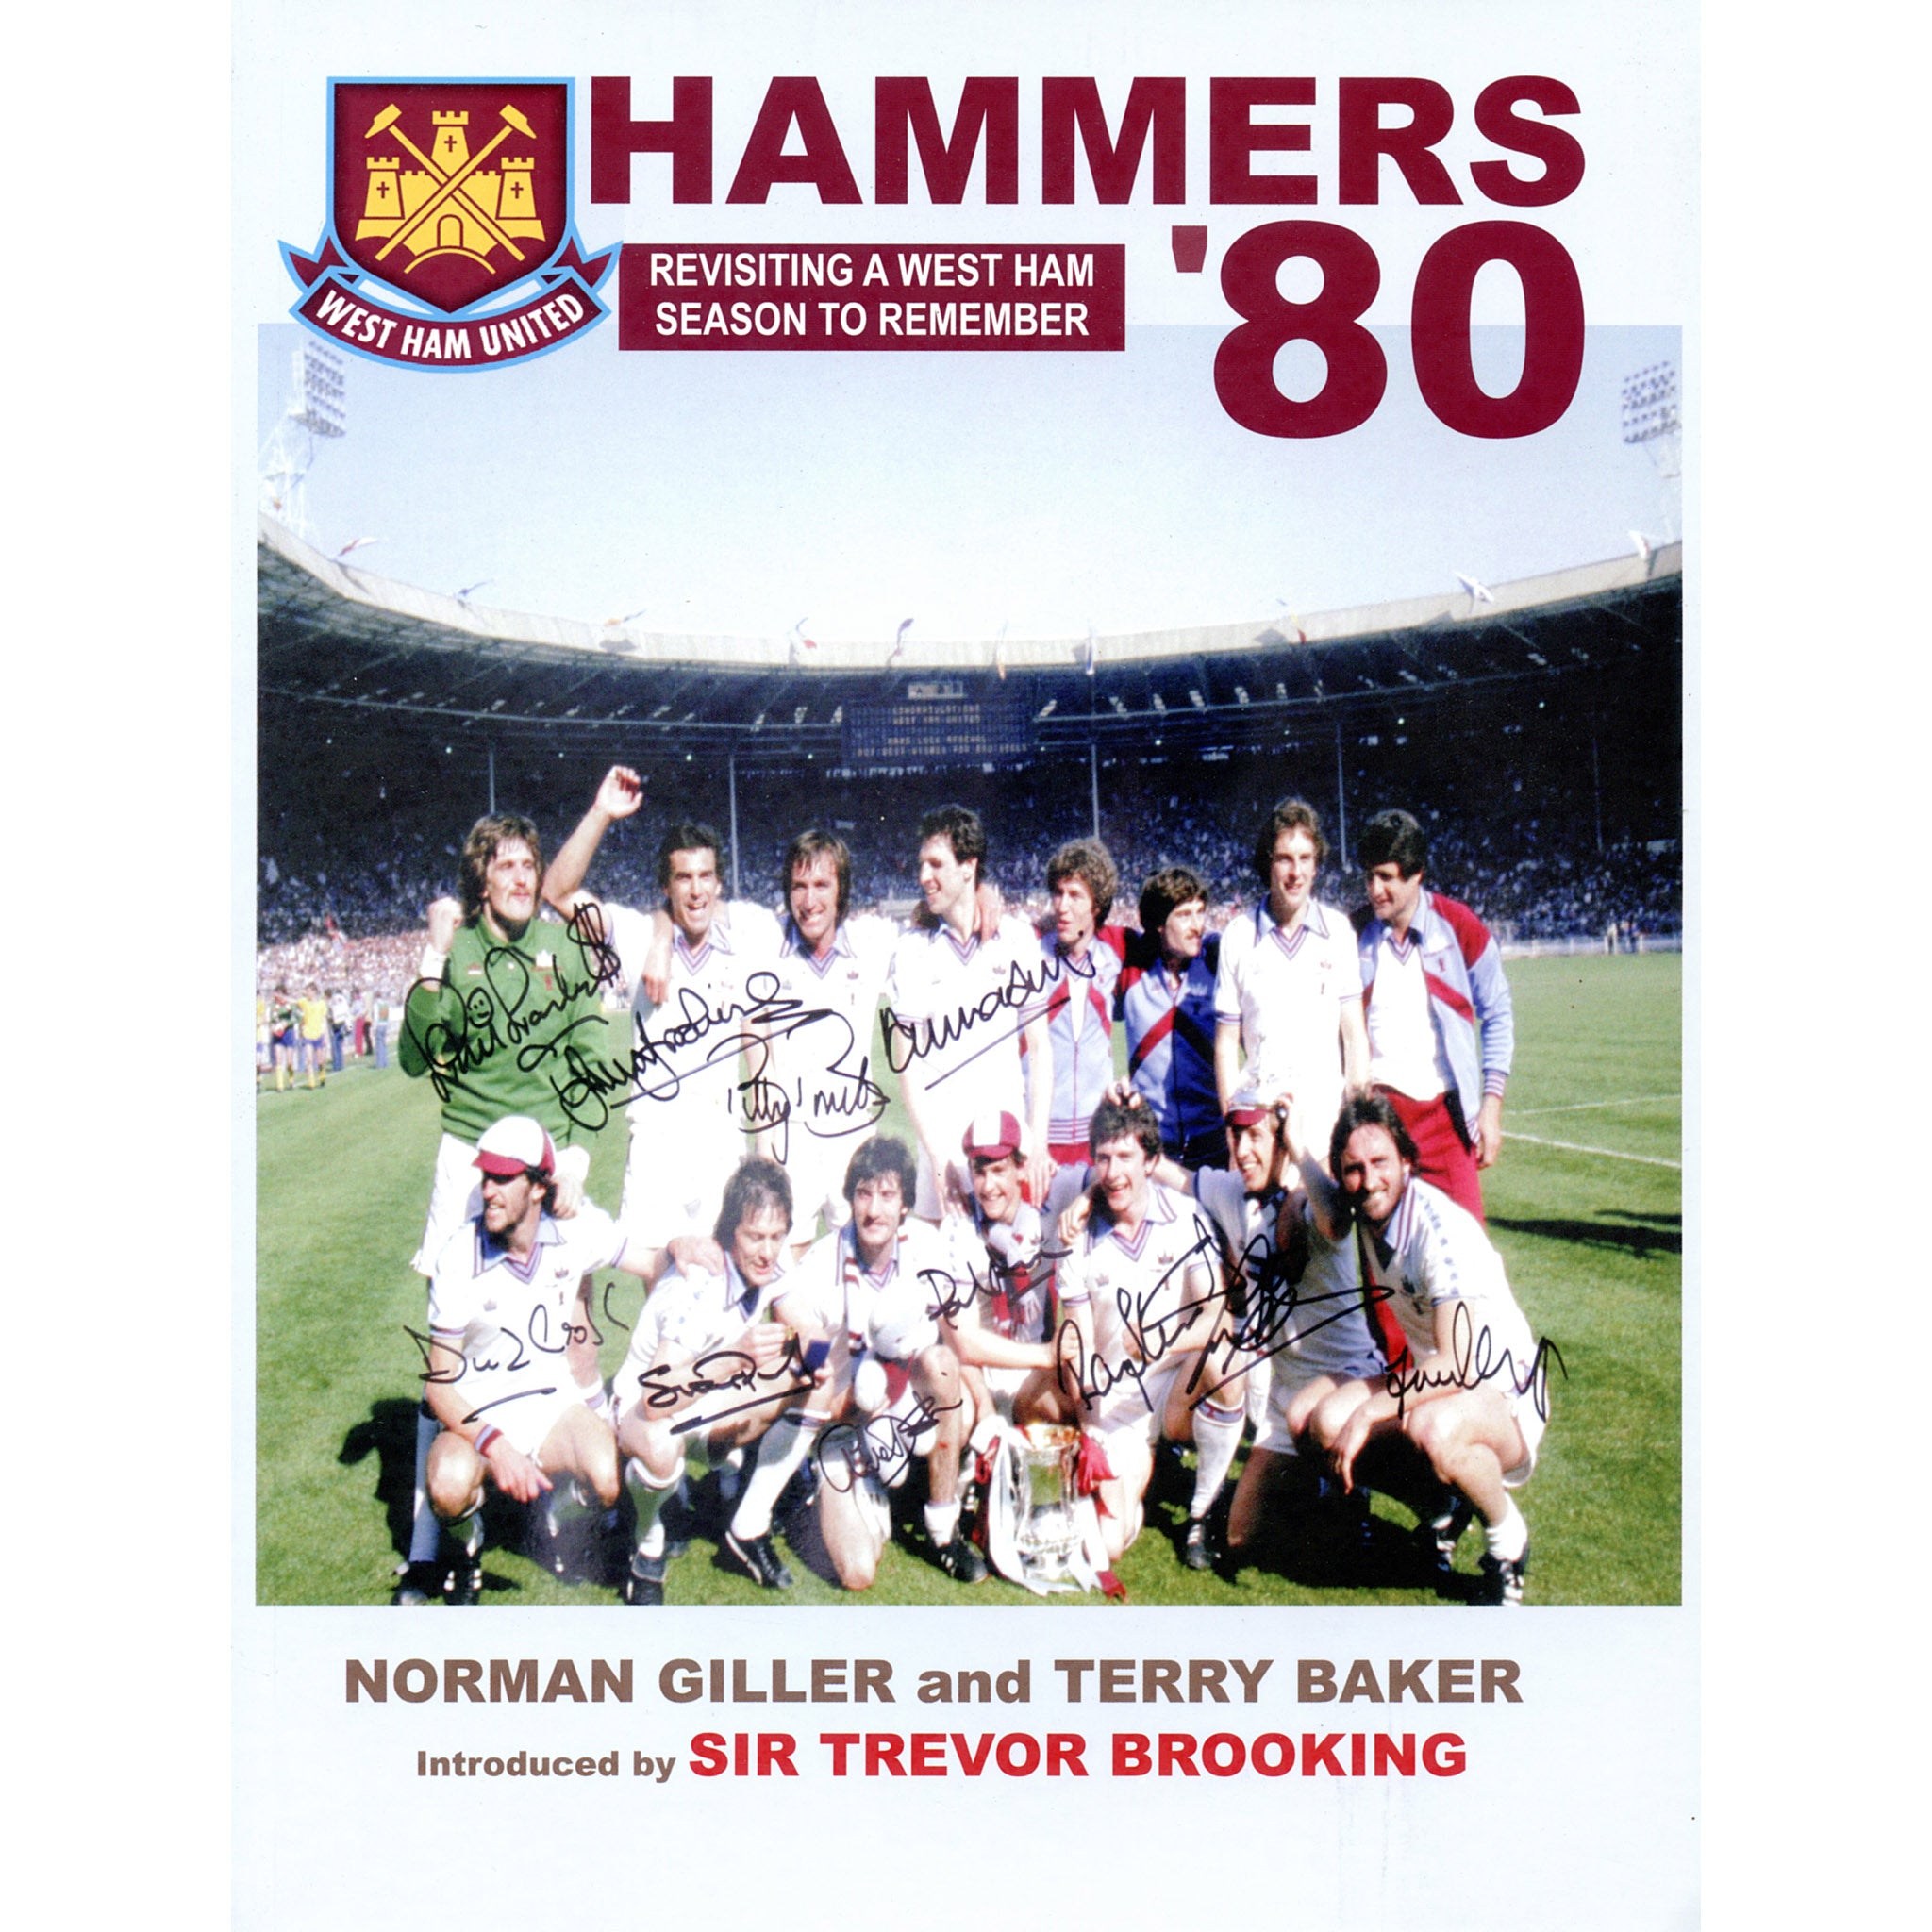 Hammers ’80 – Revisiting a West Ham season to remember